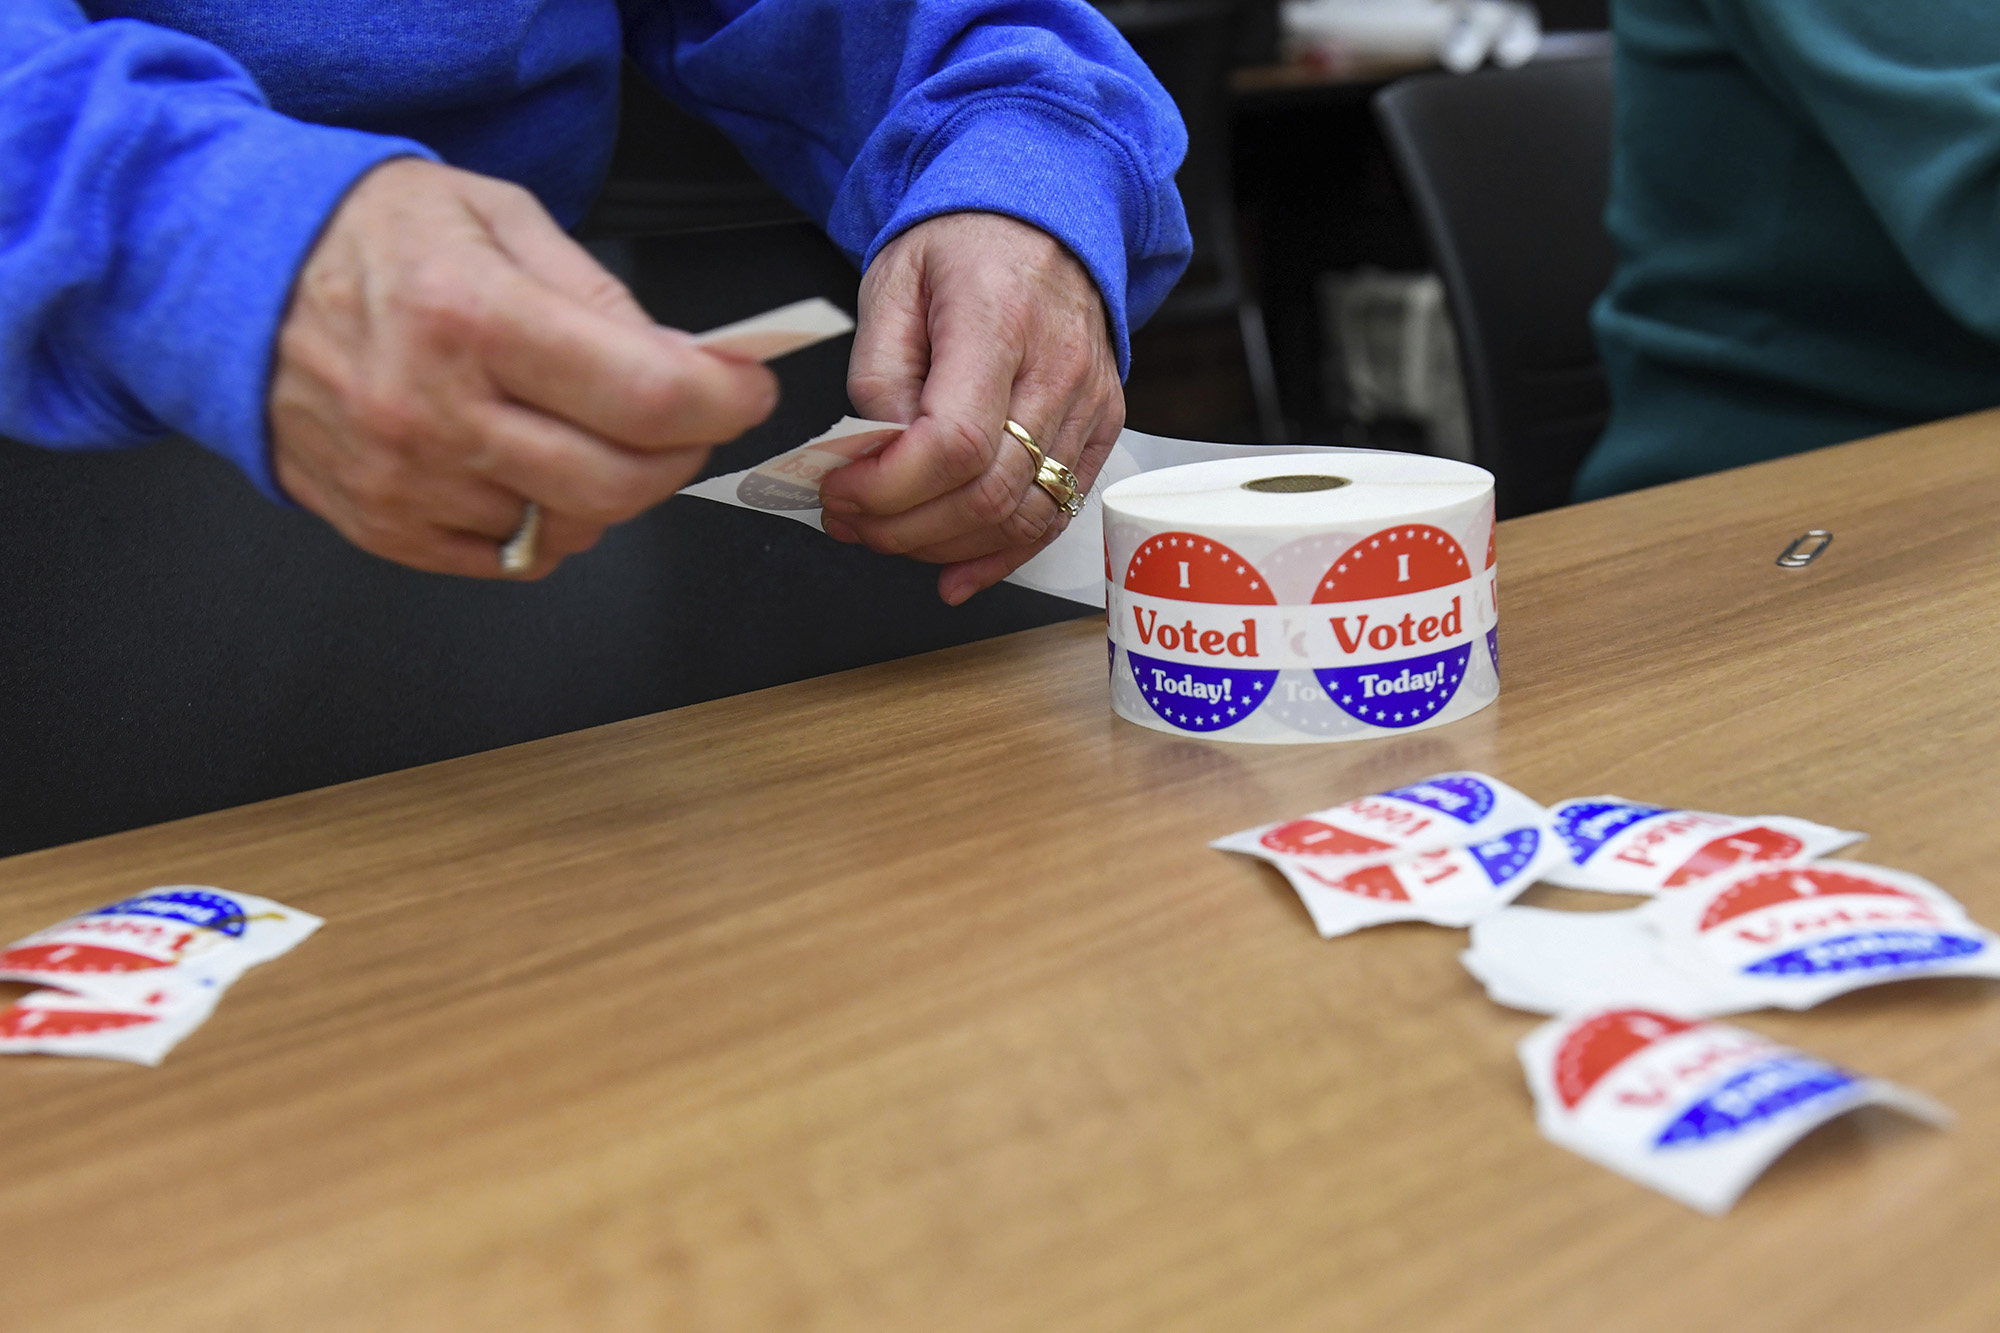 "I Voted" stickers are separated for voters on Tuesday morning, November 8, at the downtown Siouxland Public Library branch in Sioux Falls, S.D.